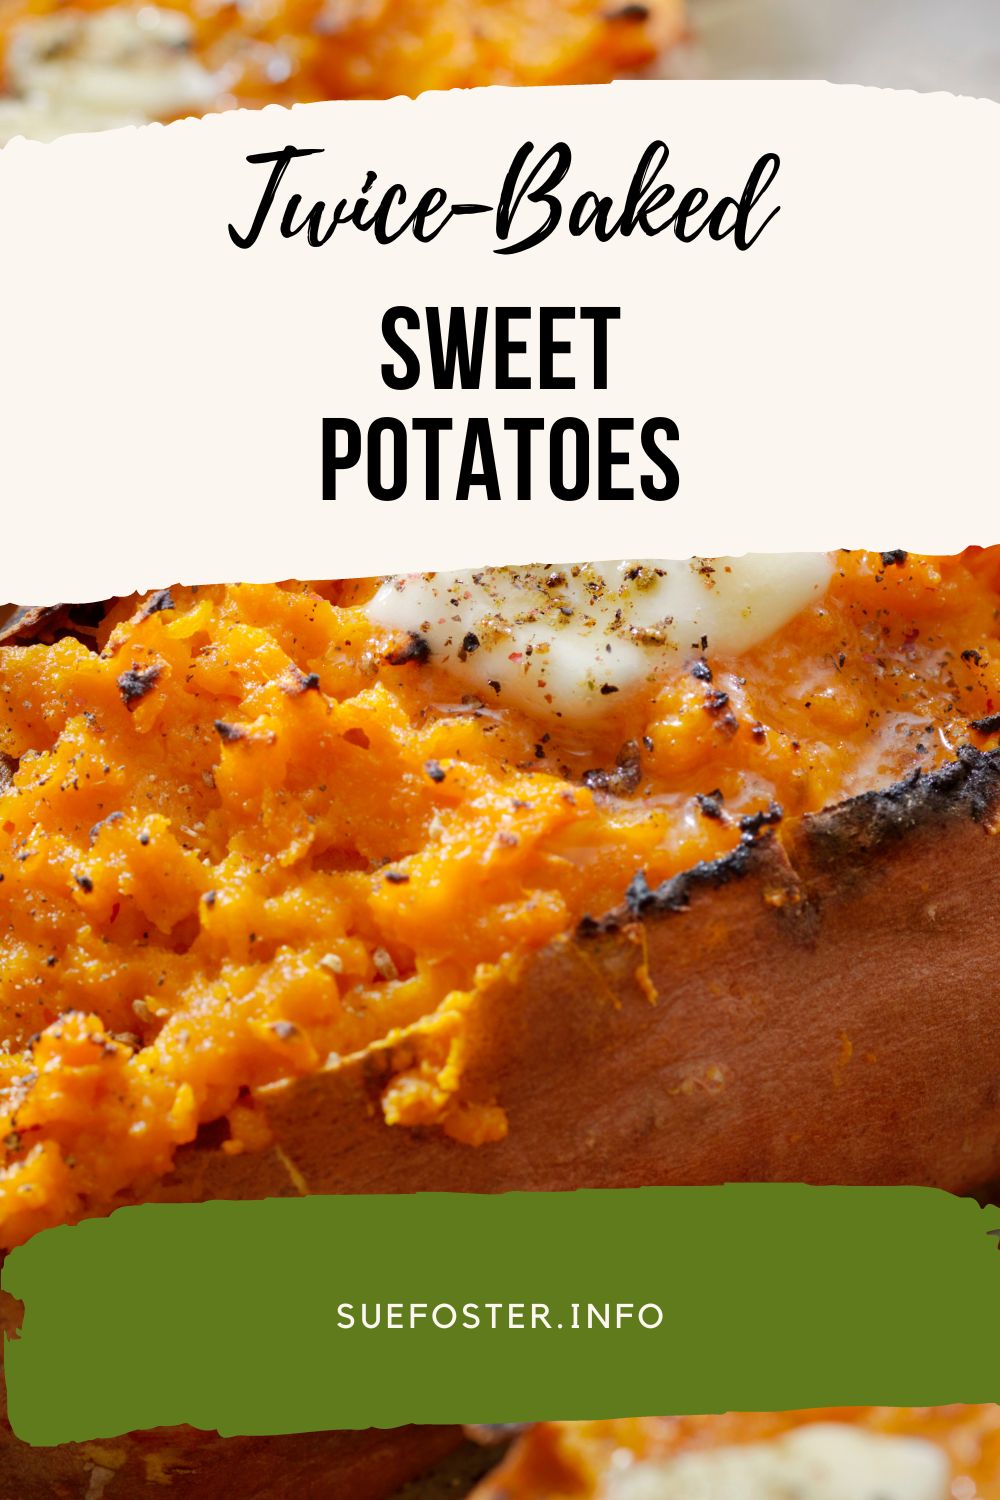 Indulge in delicious twice-baked sweet potatoes, packed with vitamins, minerals, and flavour. Perfectly balanced for a savoury delight.